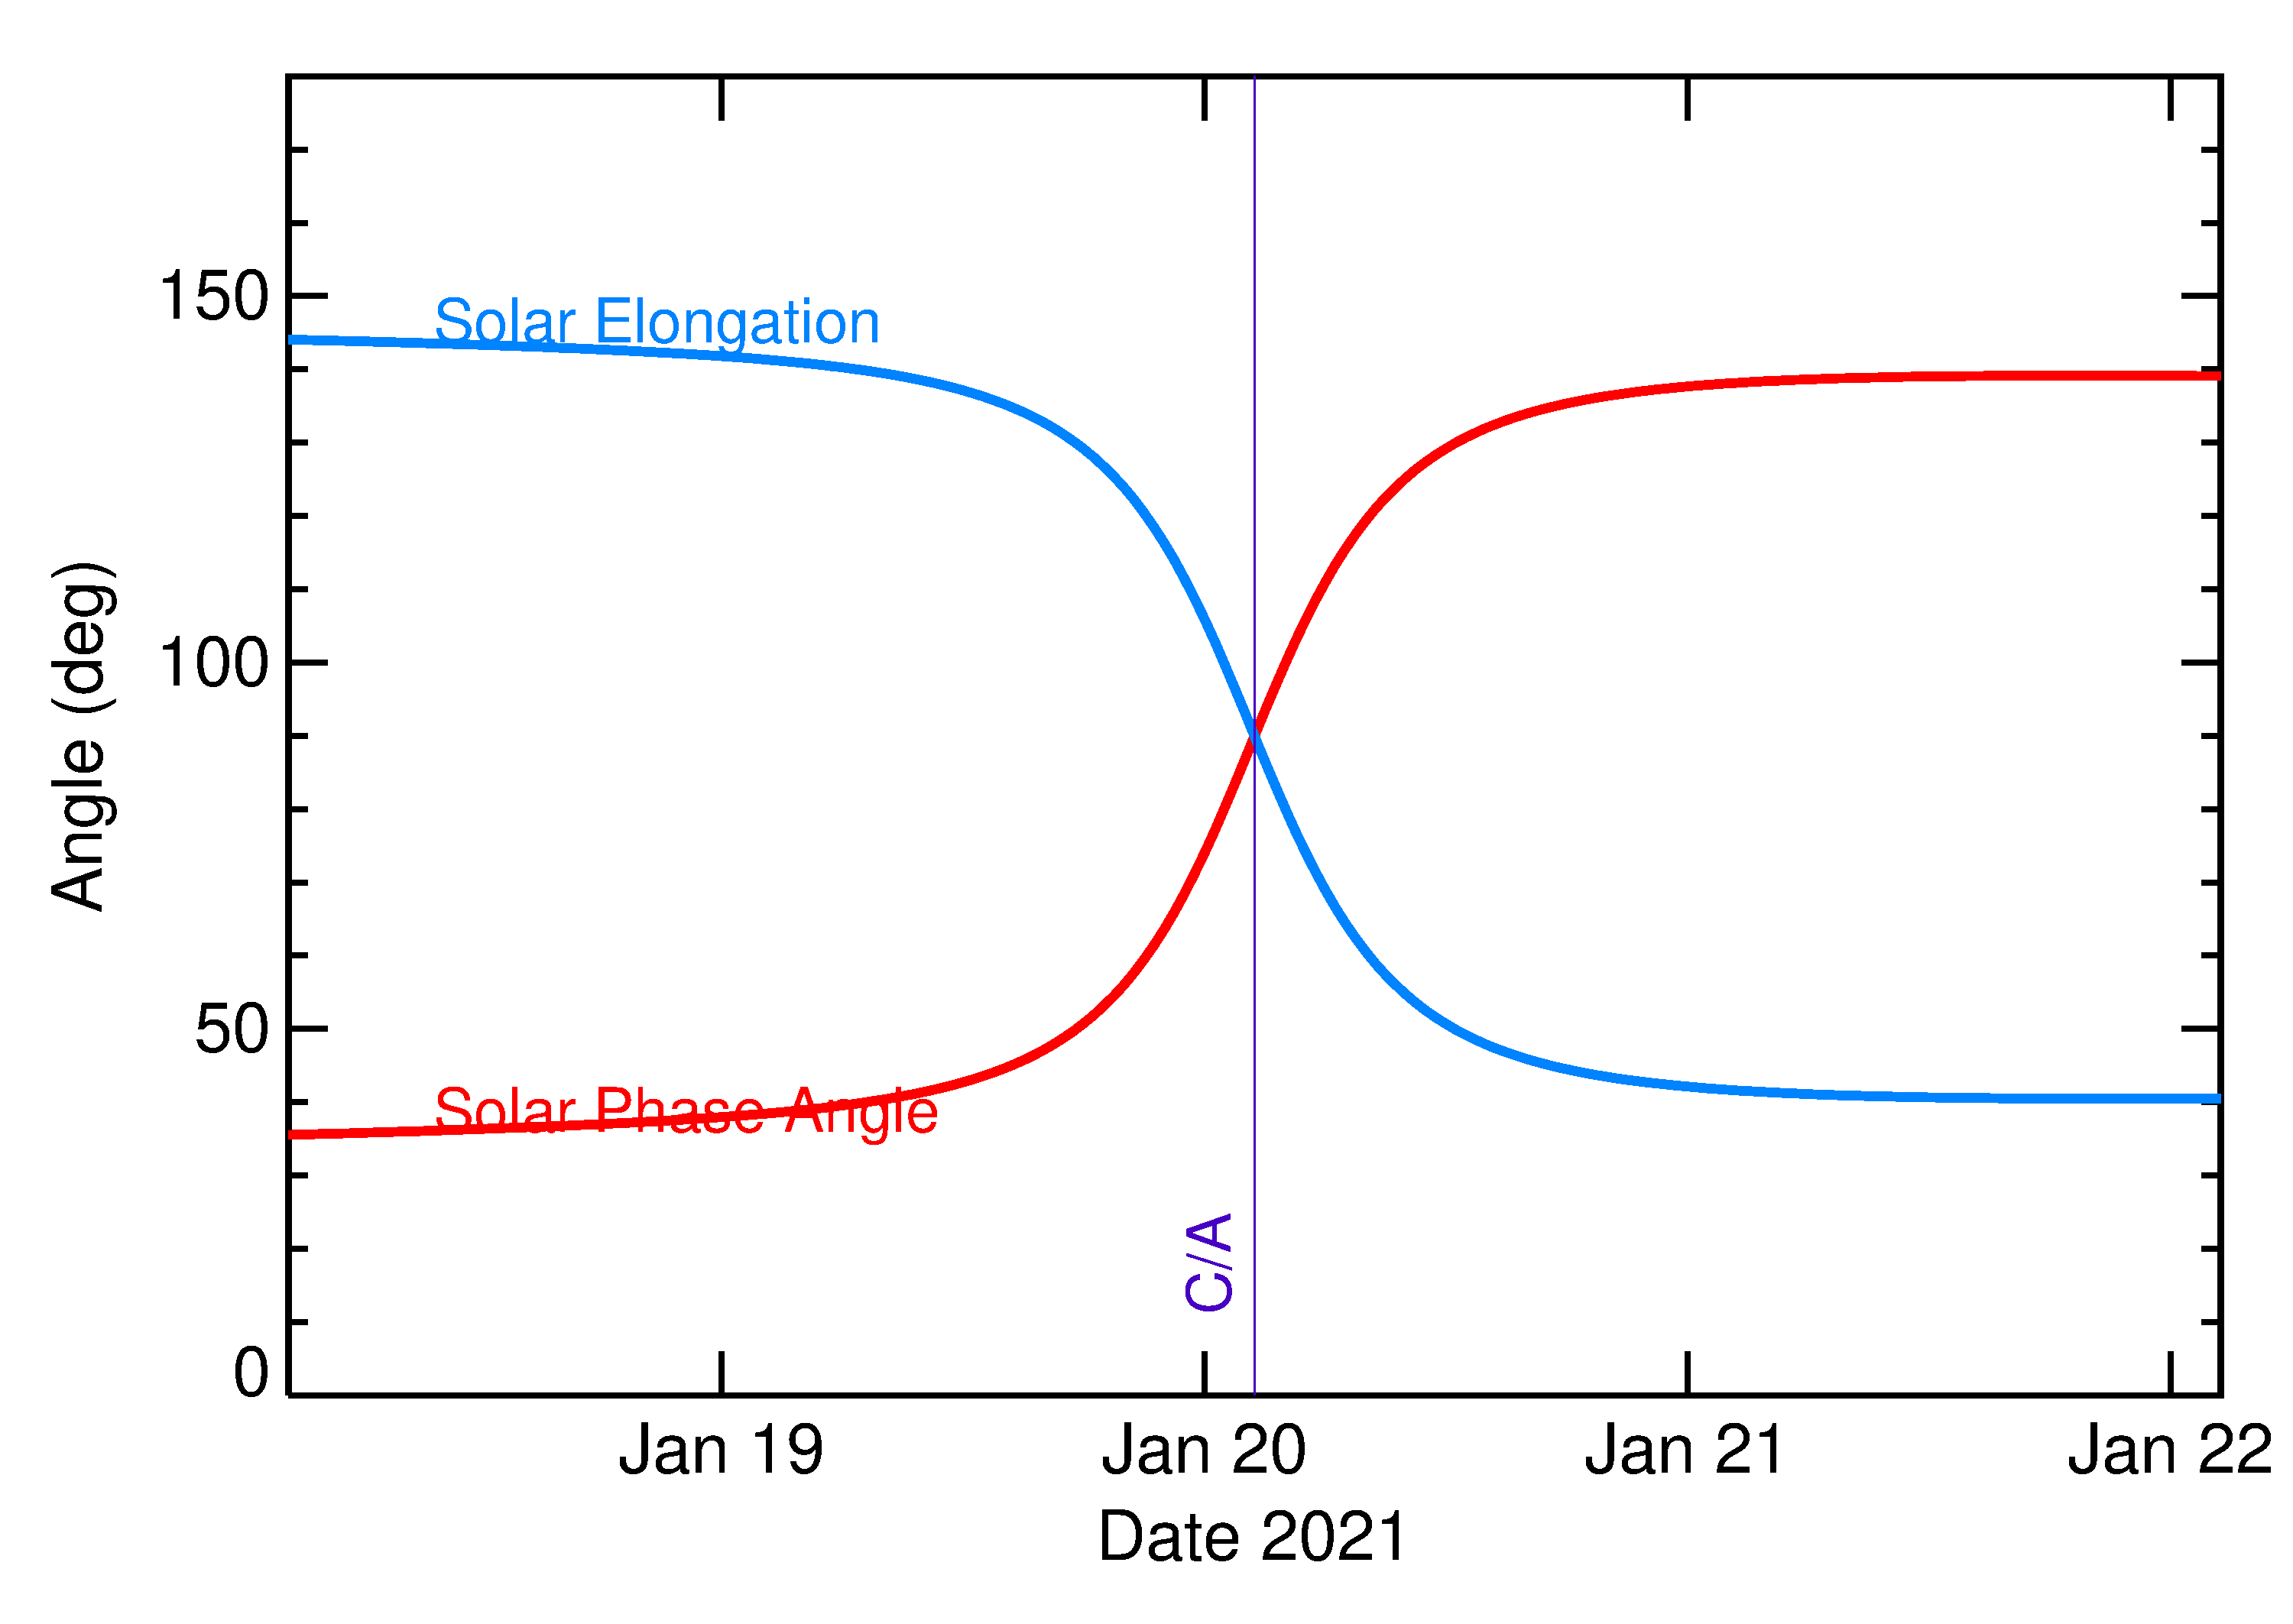 Solar Elongation and Solar Phase Angle of 2021 BO1 in the days around closest approach